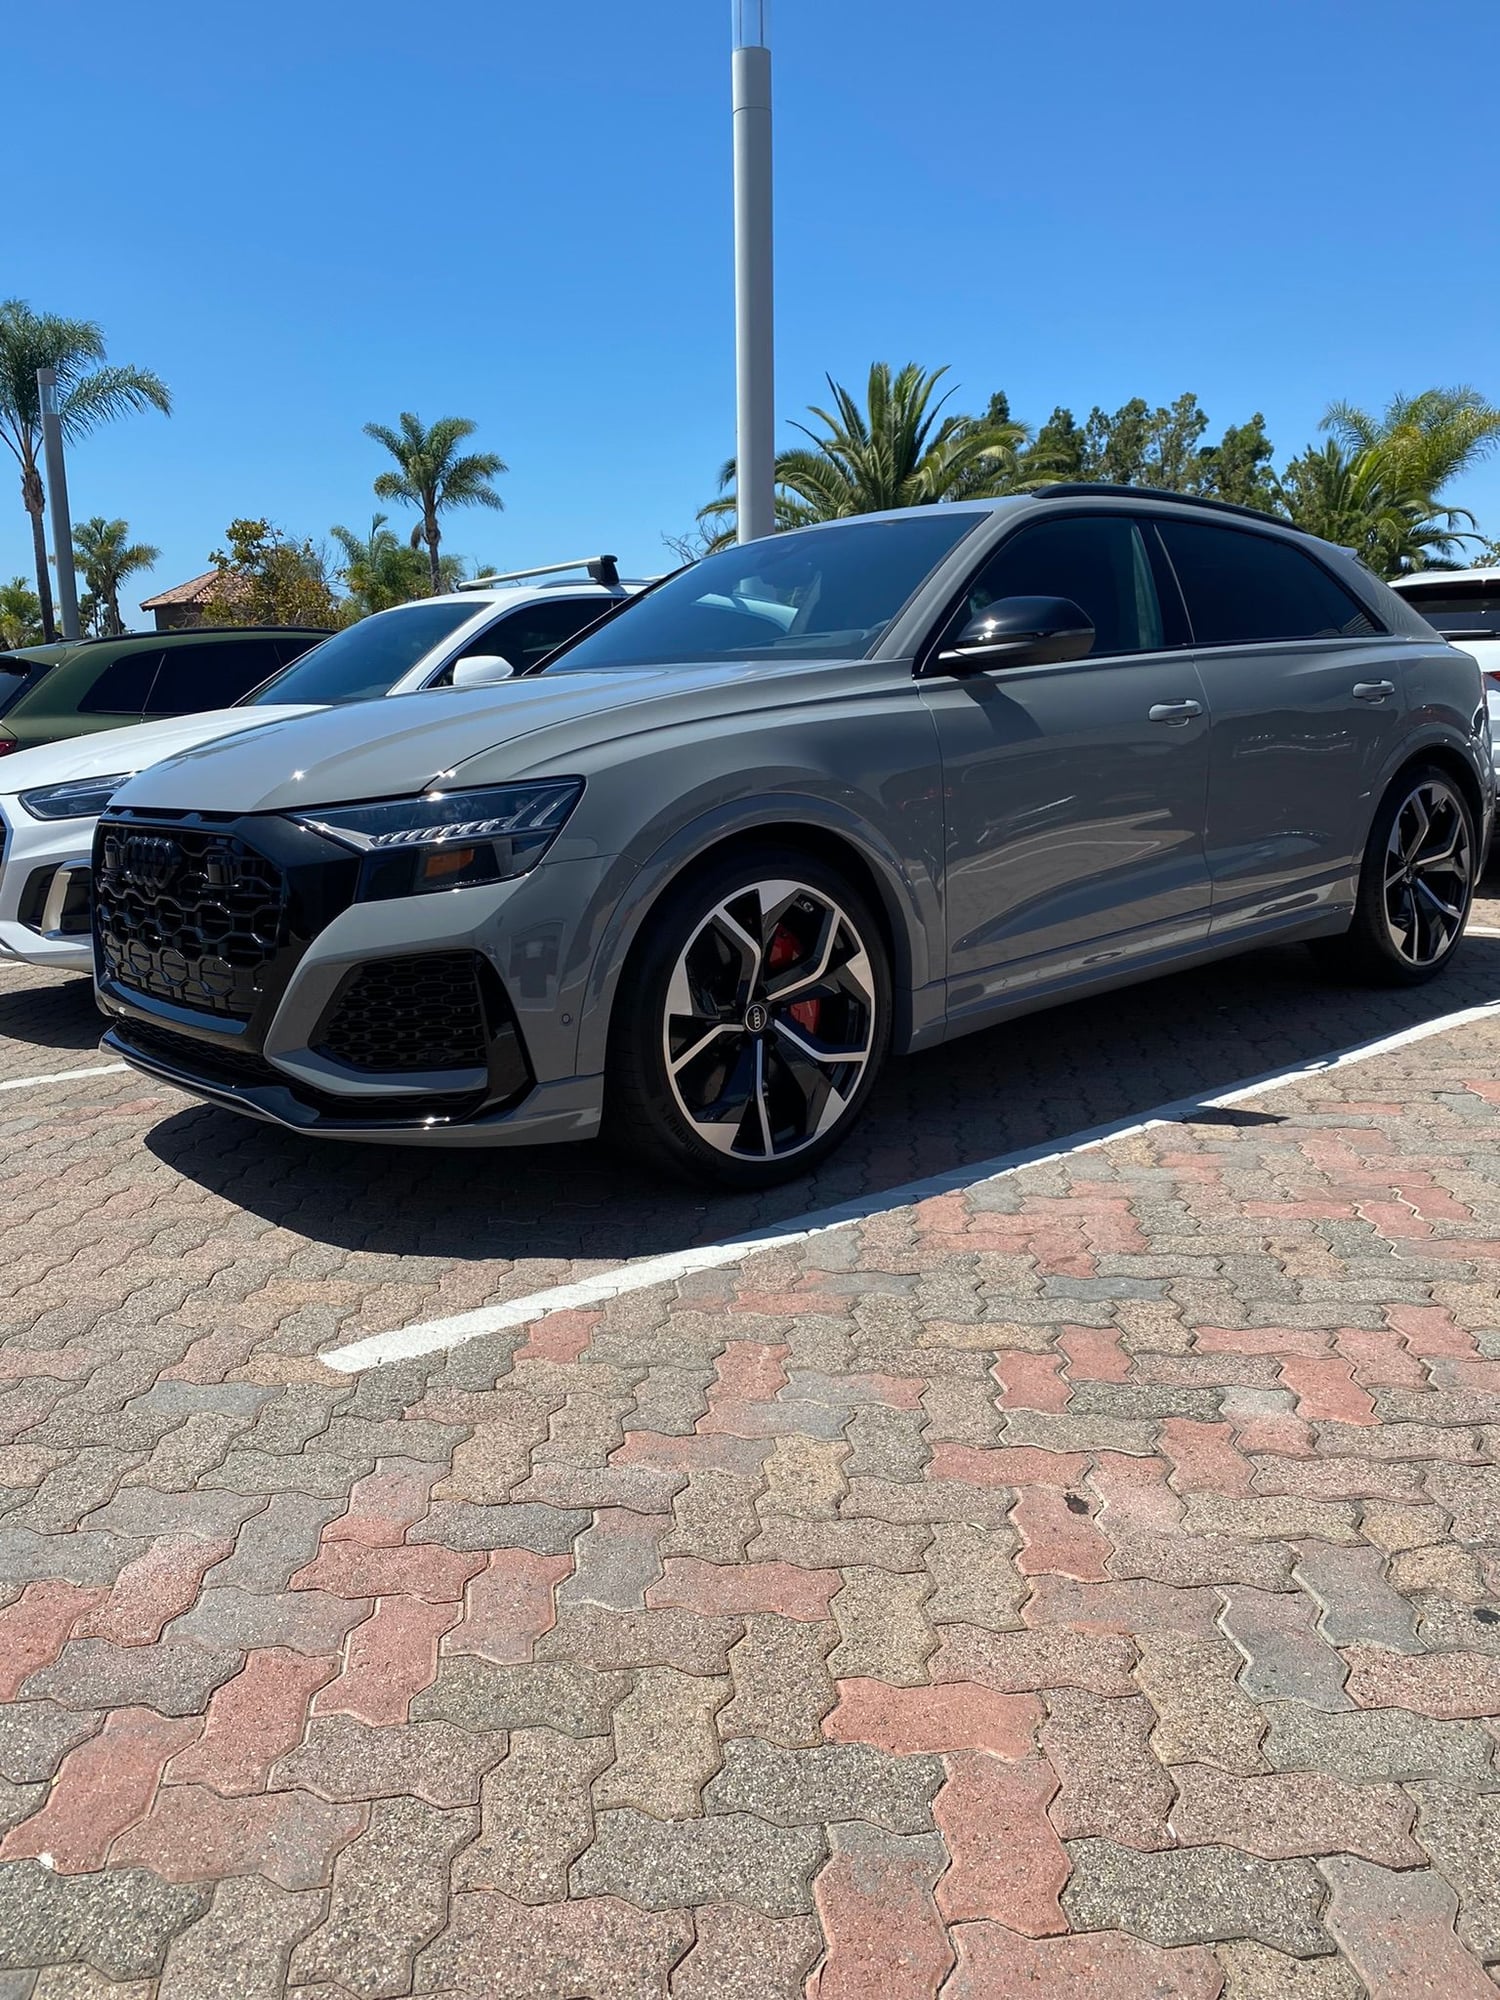 Wheels and Tires/Axles - Brand new never used RS Q8 23” wheels for sale - New - All Years Audi RS Q8 - All Years Audi Q8 - All Years Audi SQ8 - San Diego, CA 92101, United States